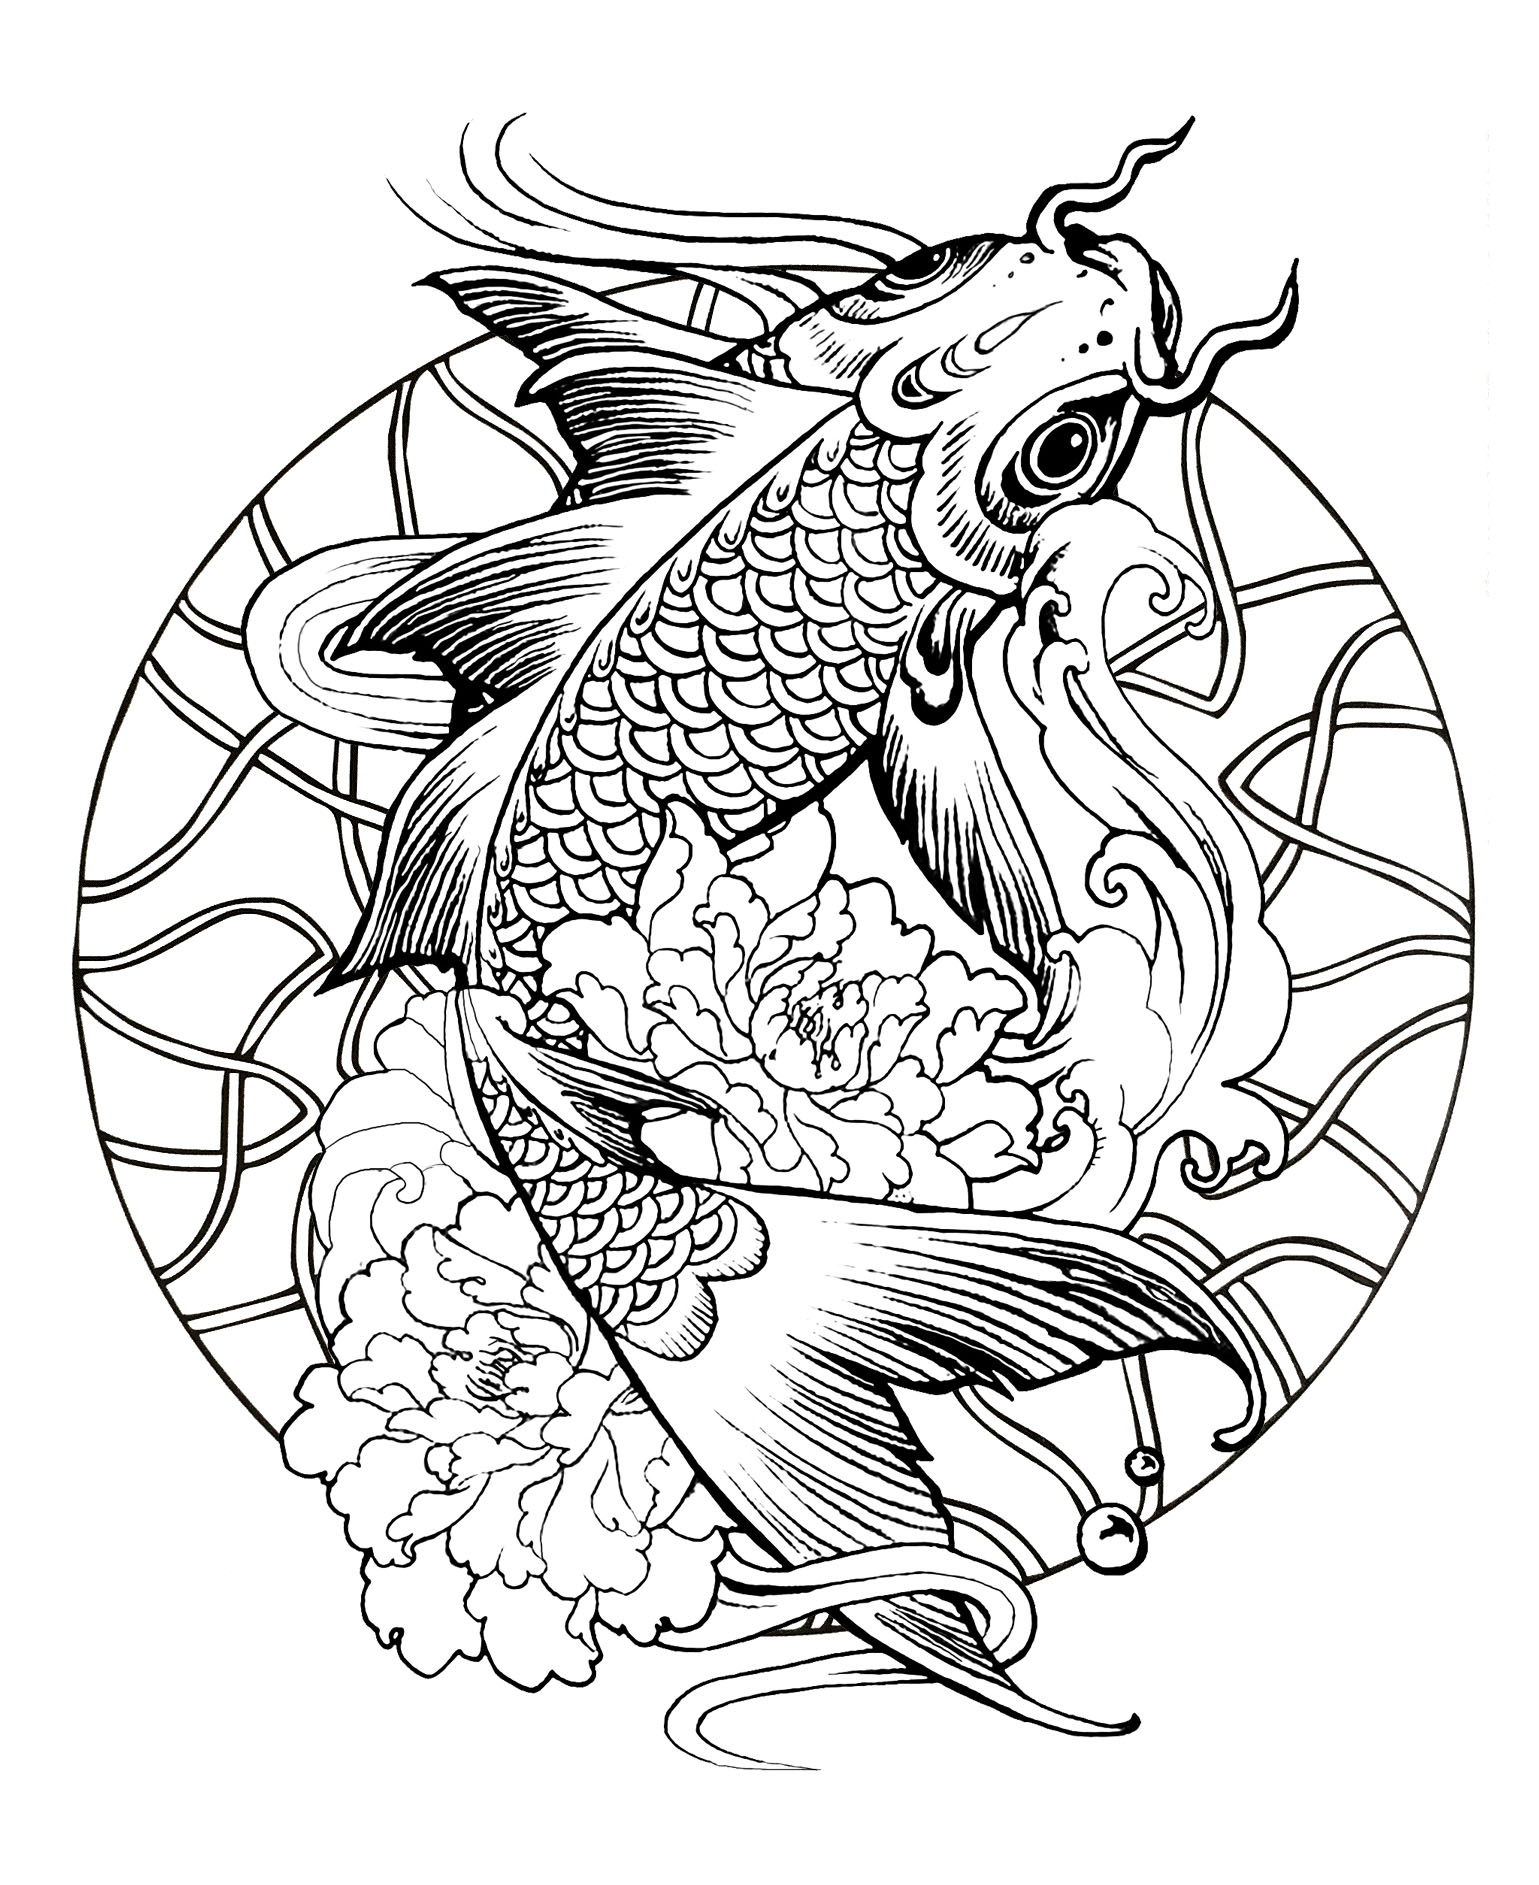 Pisces free to color for children - Pisces Kids Coloring Pages